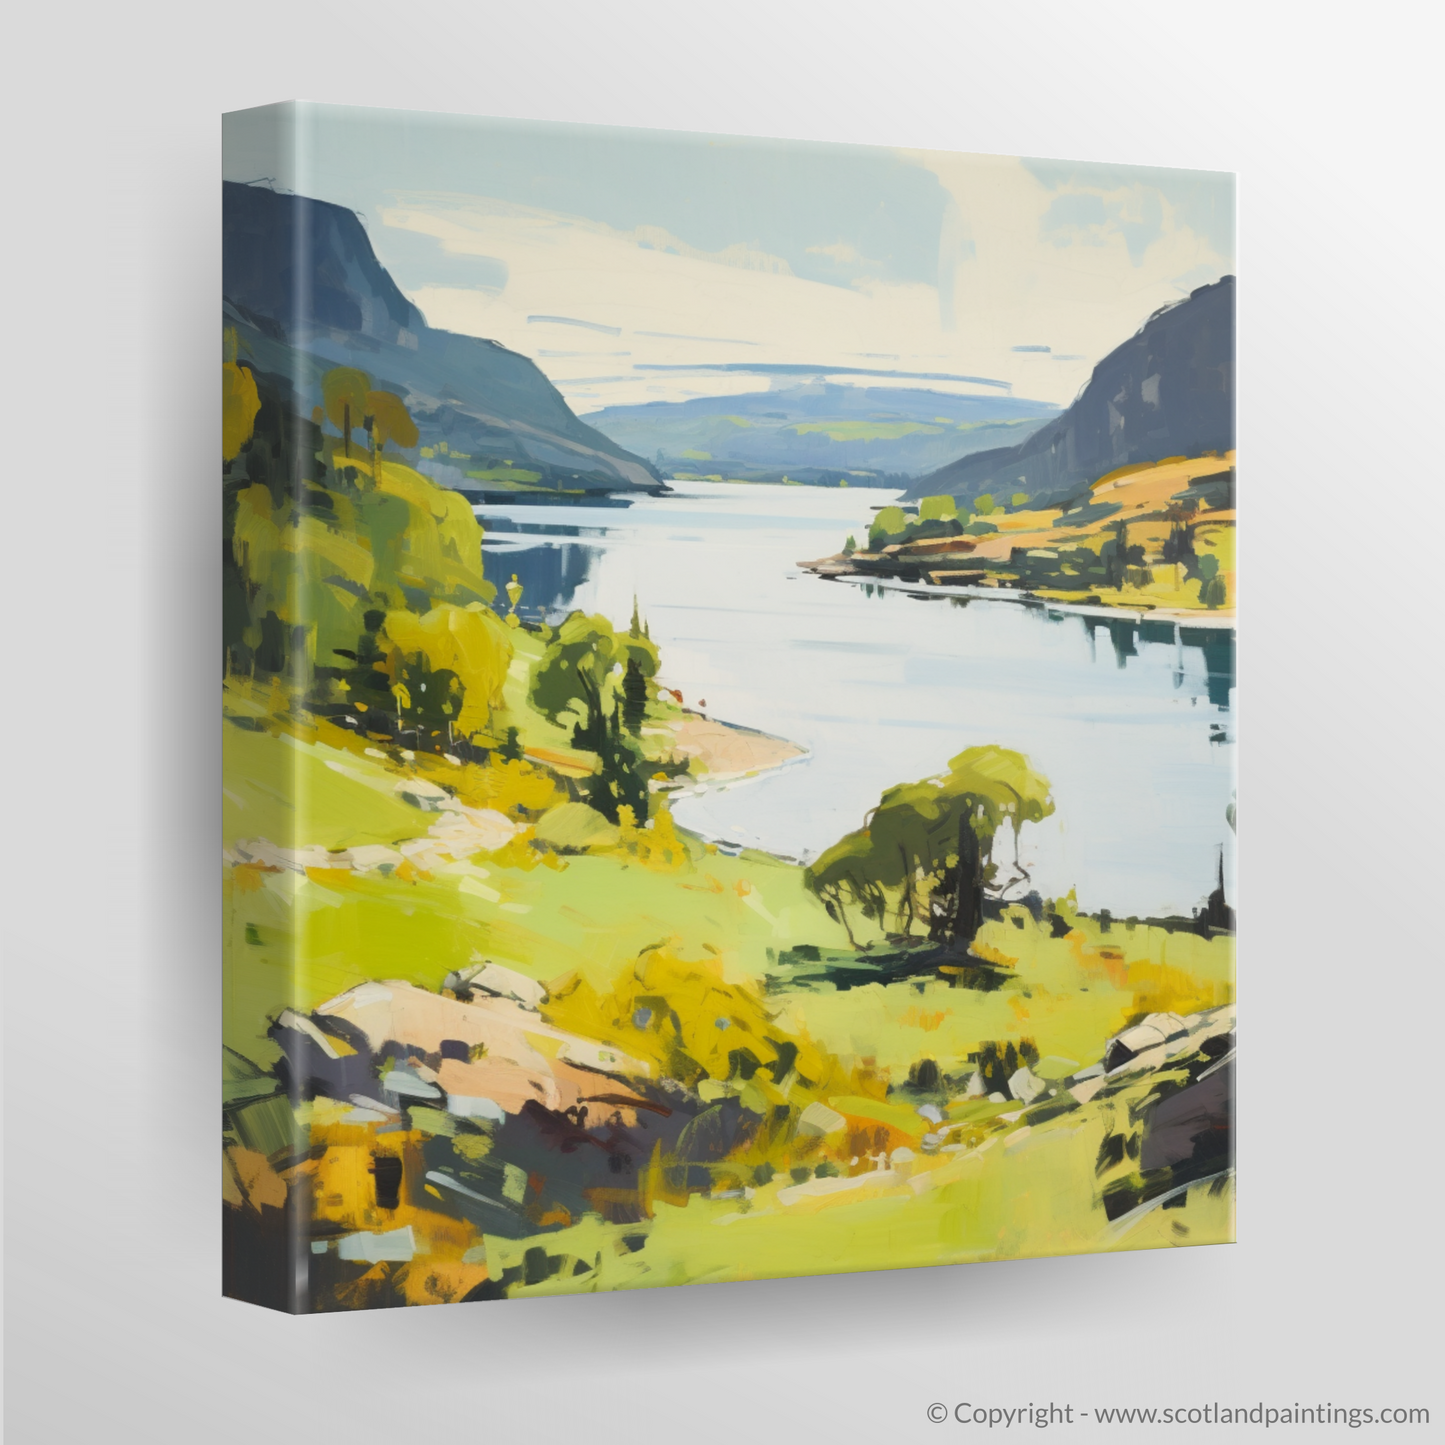 Painting and Art Print of Loch Ness, Highlands in summer. Summer Serenade in the Scottish Highlands.